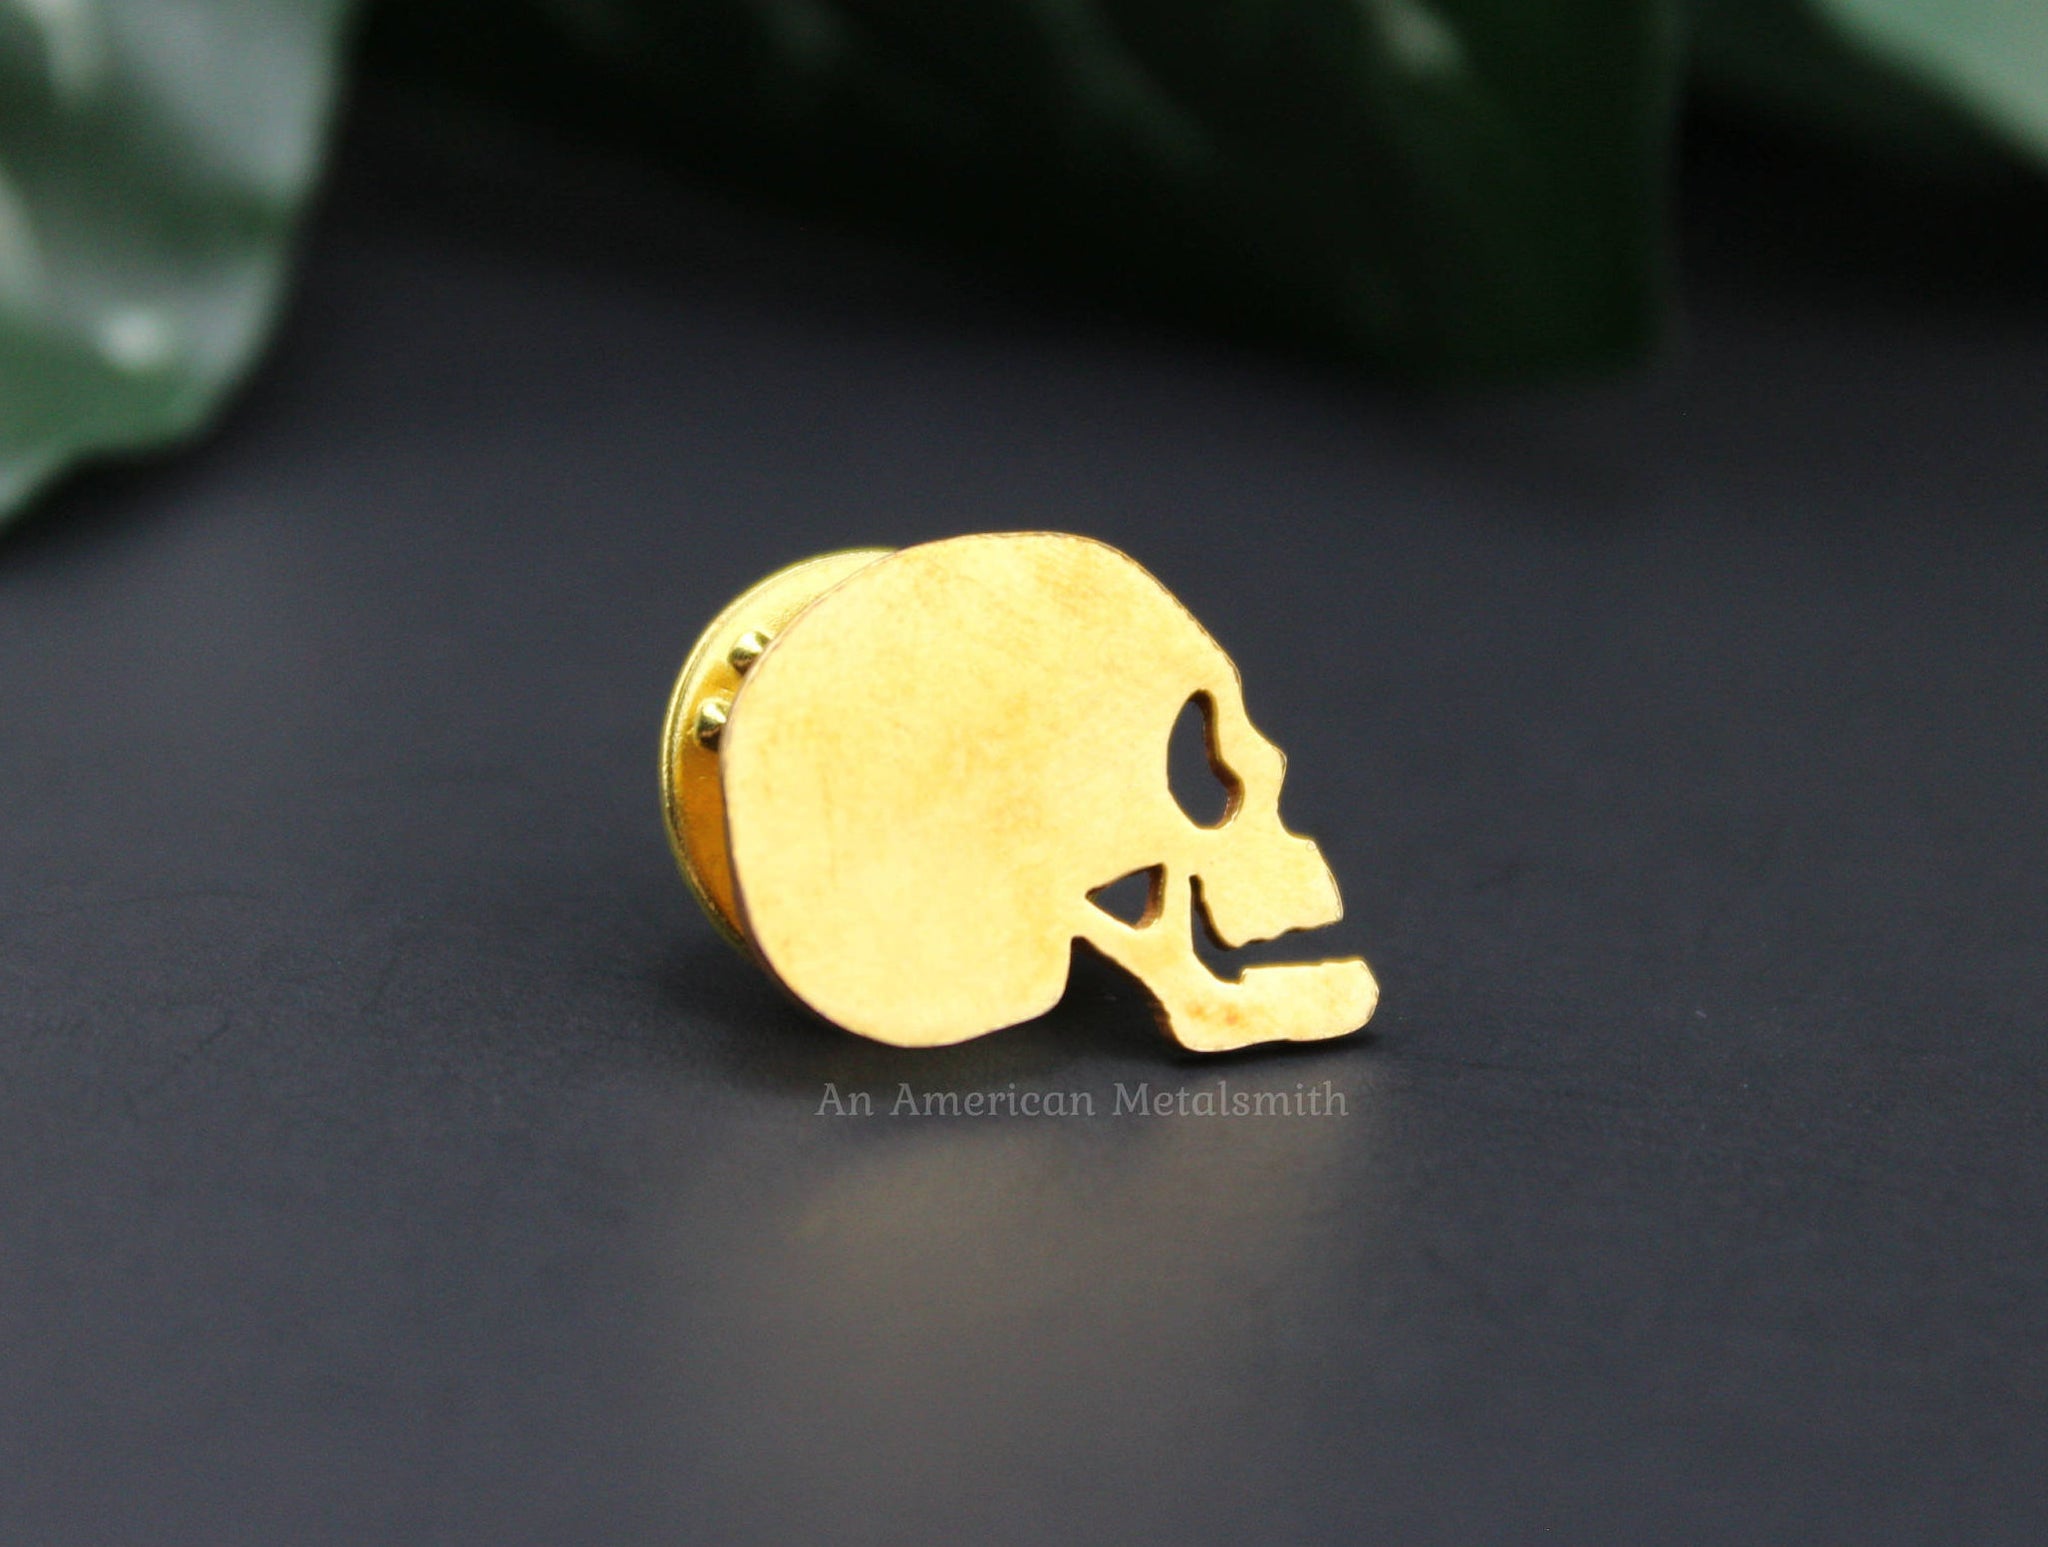 Brass skull pin made by An American Metalsmith